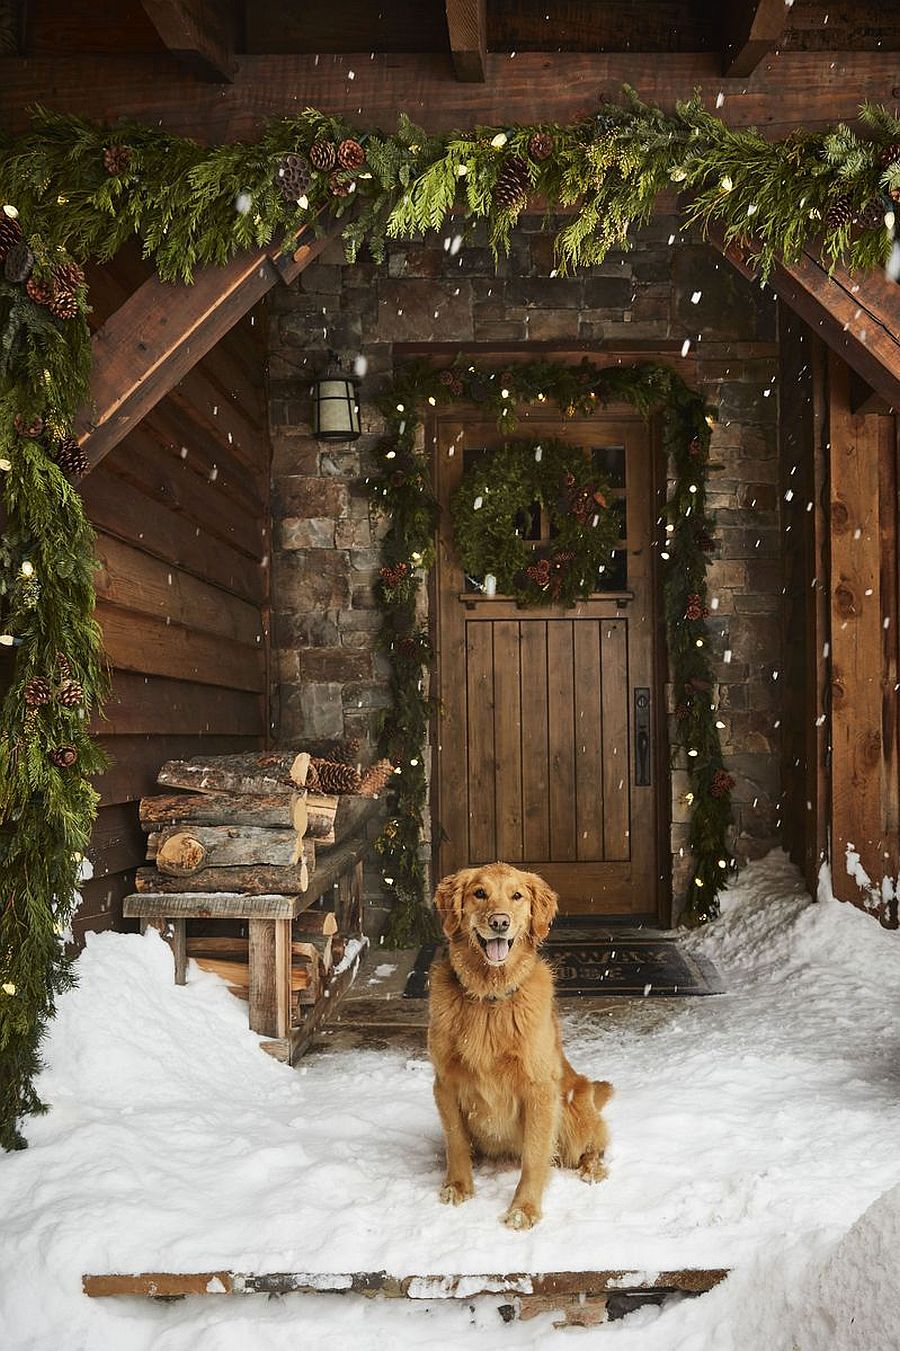 It is garlands and wreaths that bring Chrsitmas magic to this snow-clad home